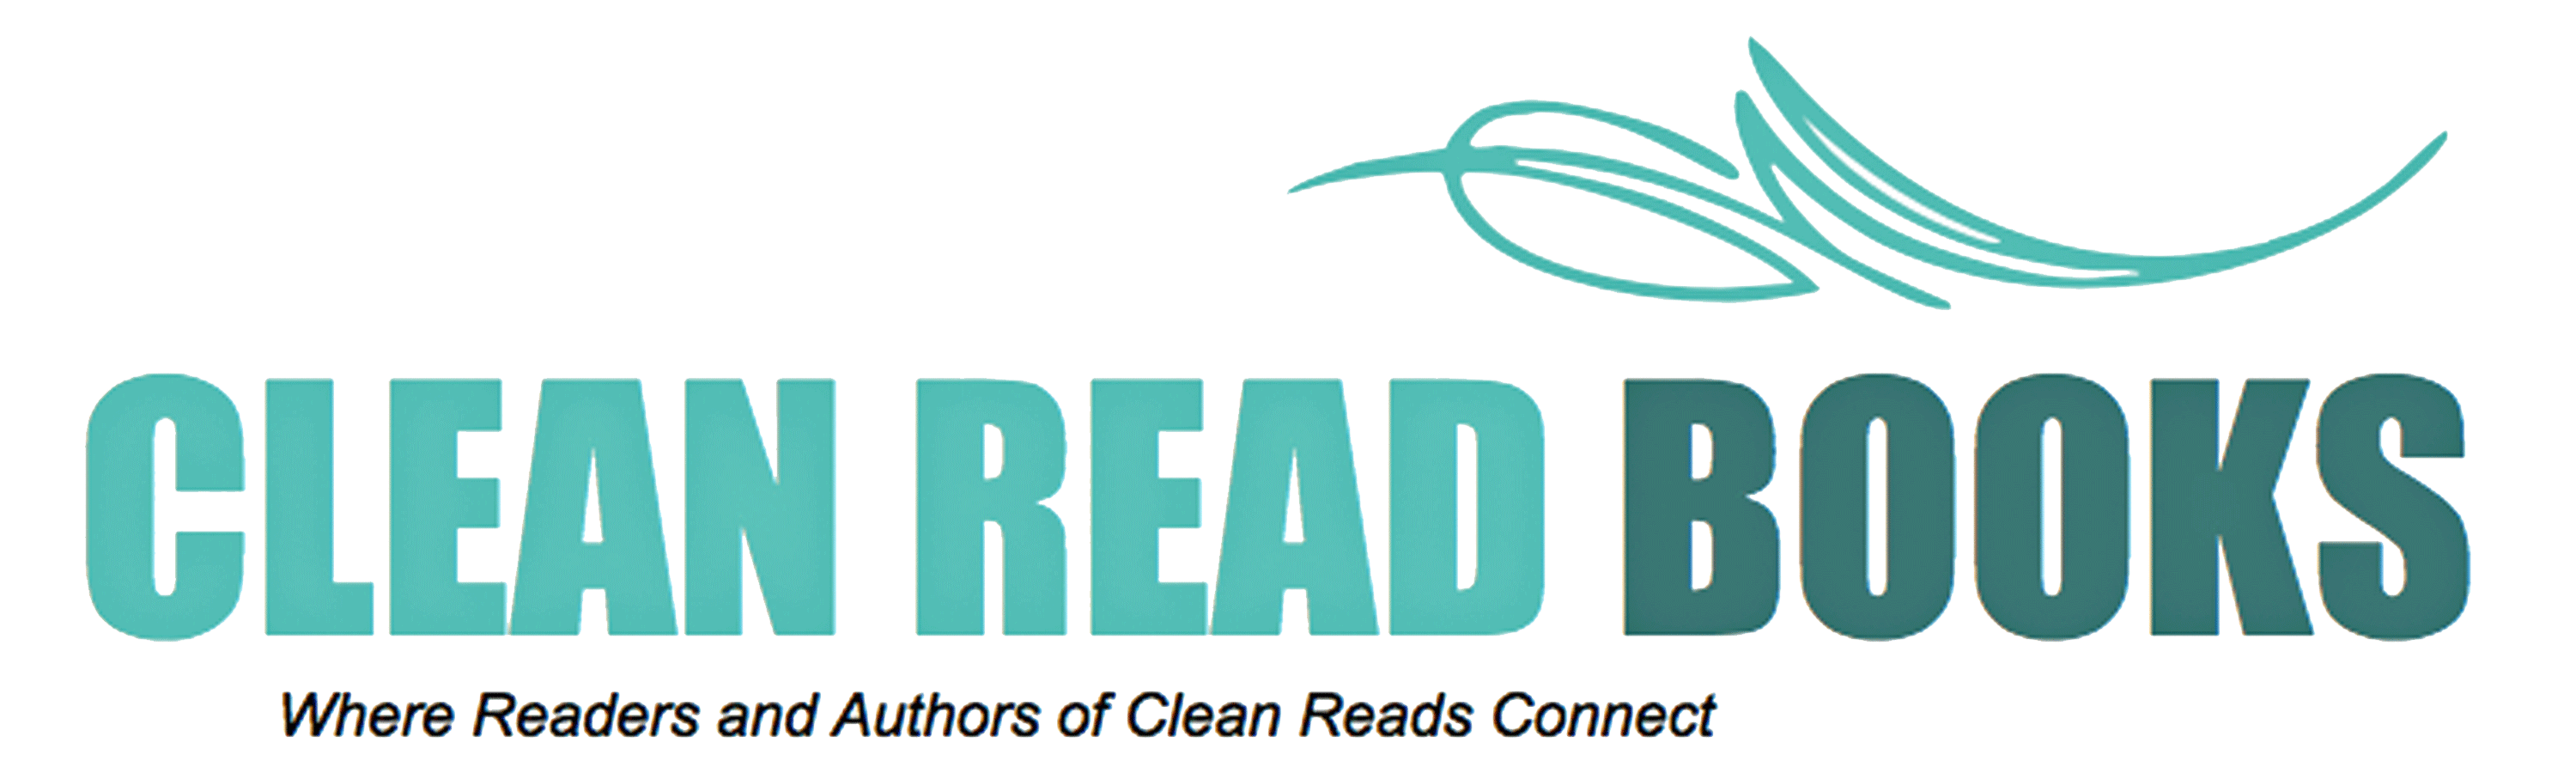 clean read books, where authors and readers of clean reads connect